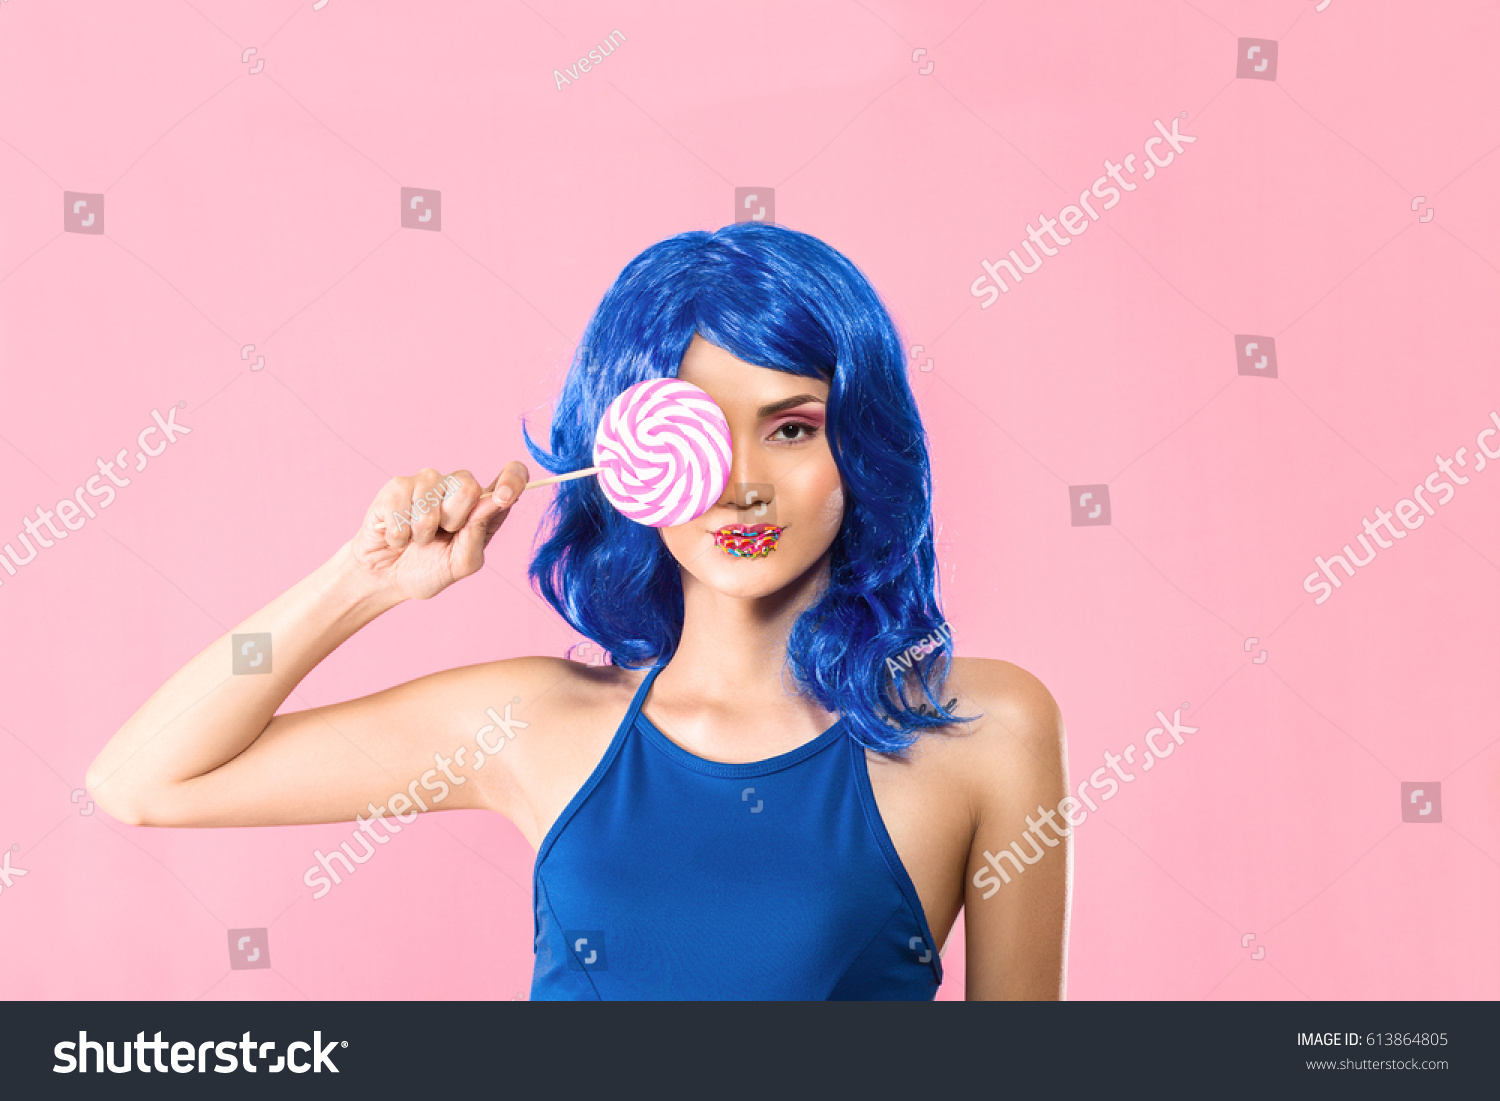 Fashion young woman with sweet makeup holding lolipop in her hands #613864805